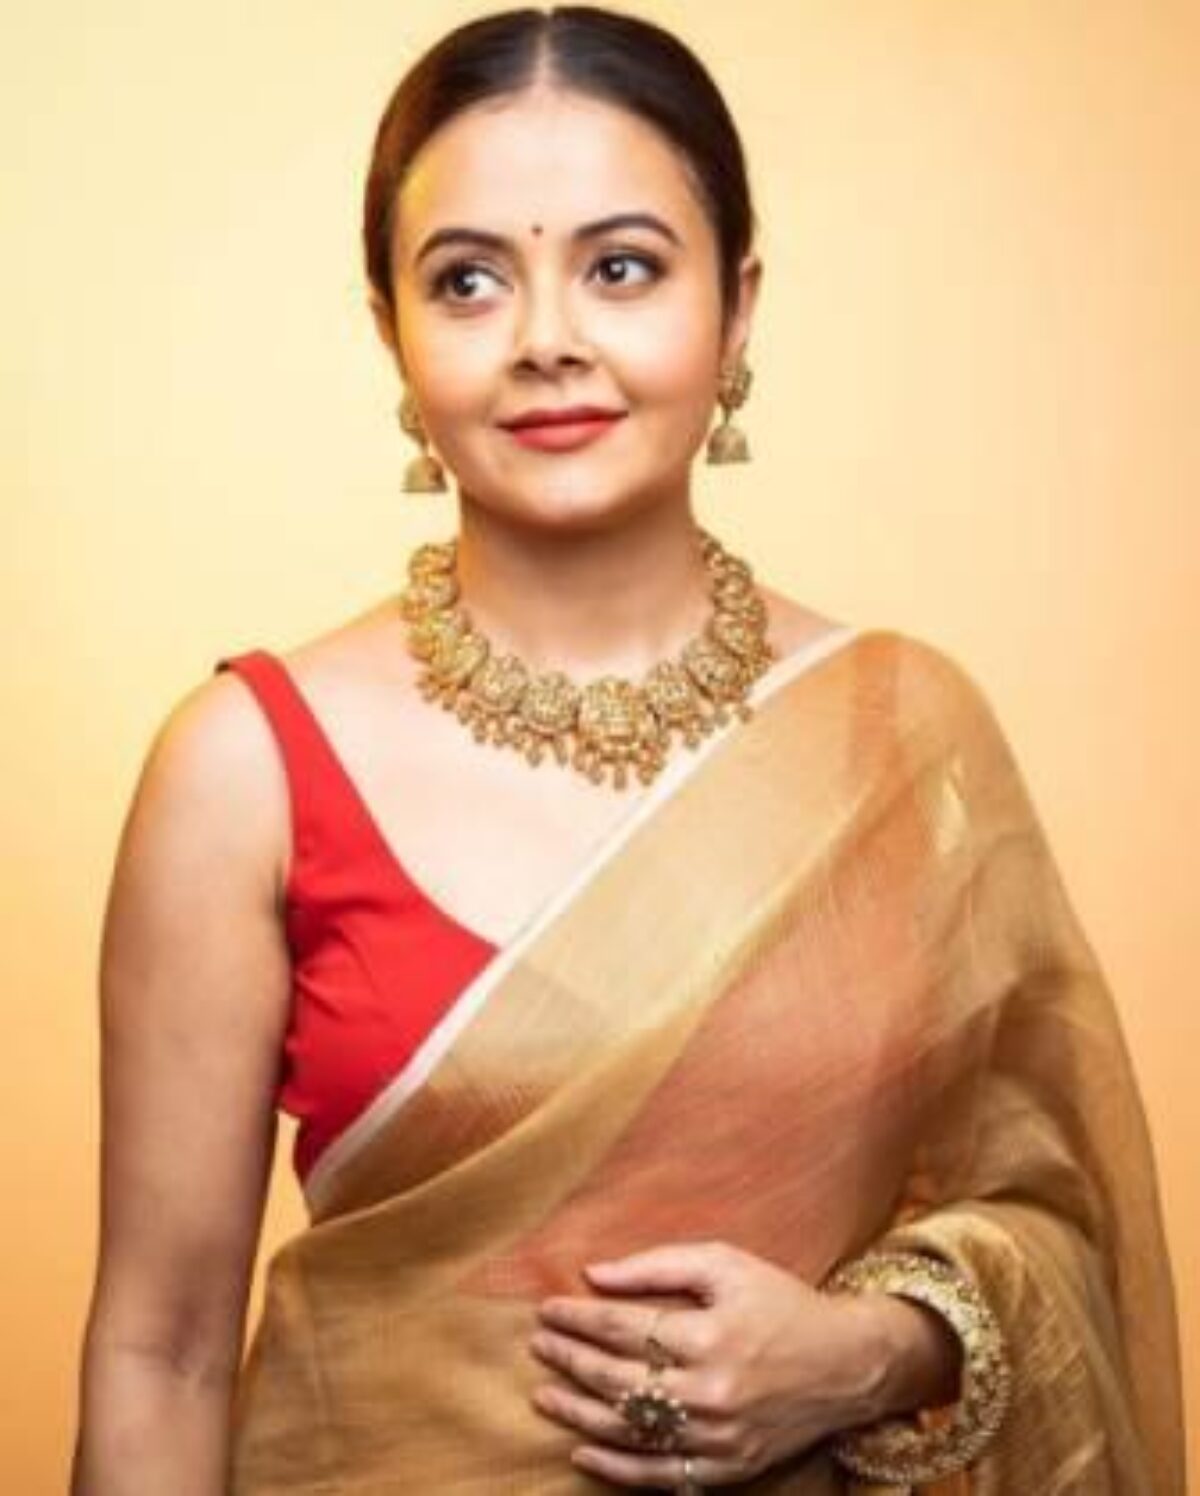 Actress Devoleena Bhattacharjee Has Been Trolled For Her Choice Of Partner. She Said If She Had Been Married A Wealthy Man, She Would Have Been Labeled A Gold Digger